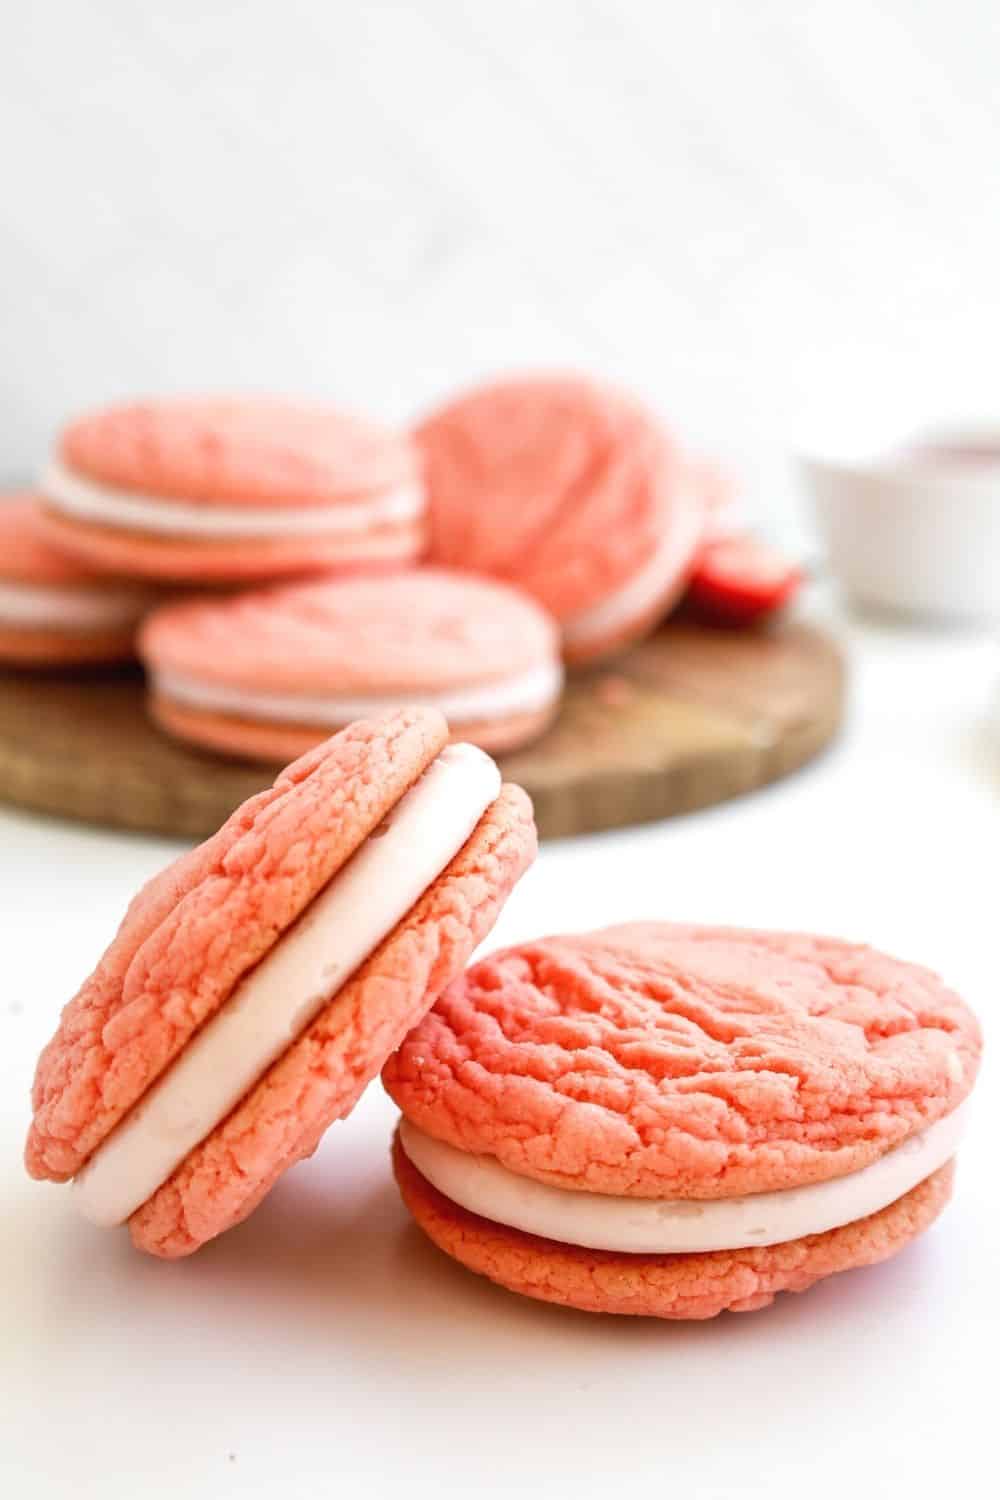 a few stacked strawberry whoopie pies in front of several other sandwich cookies in the background